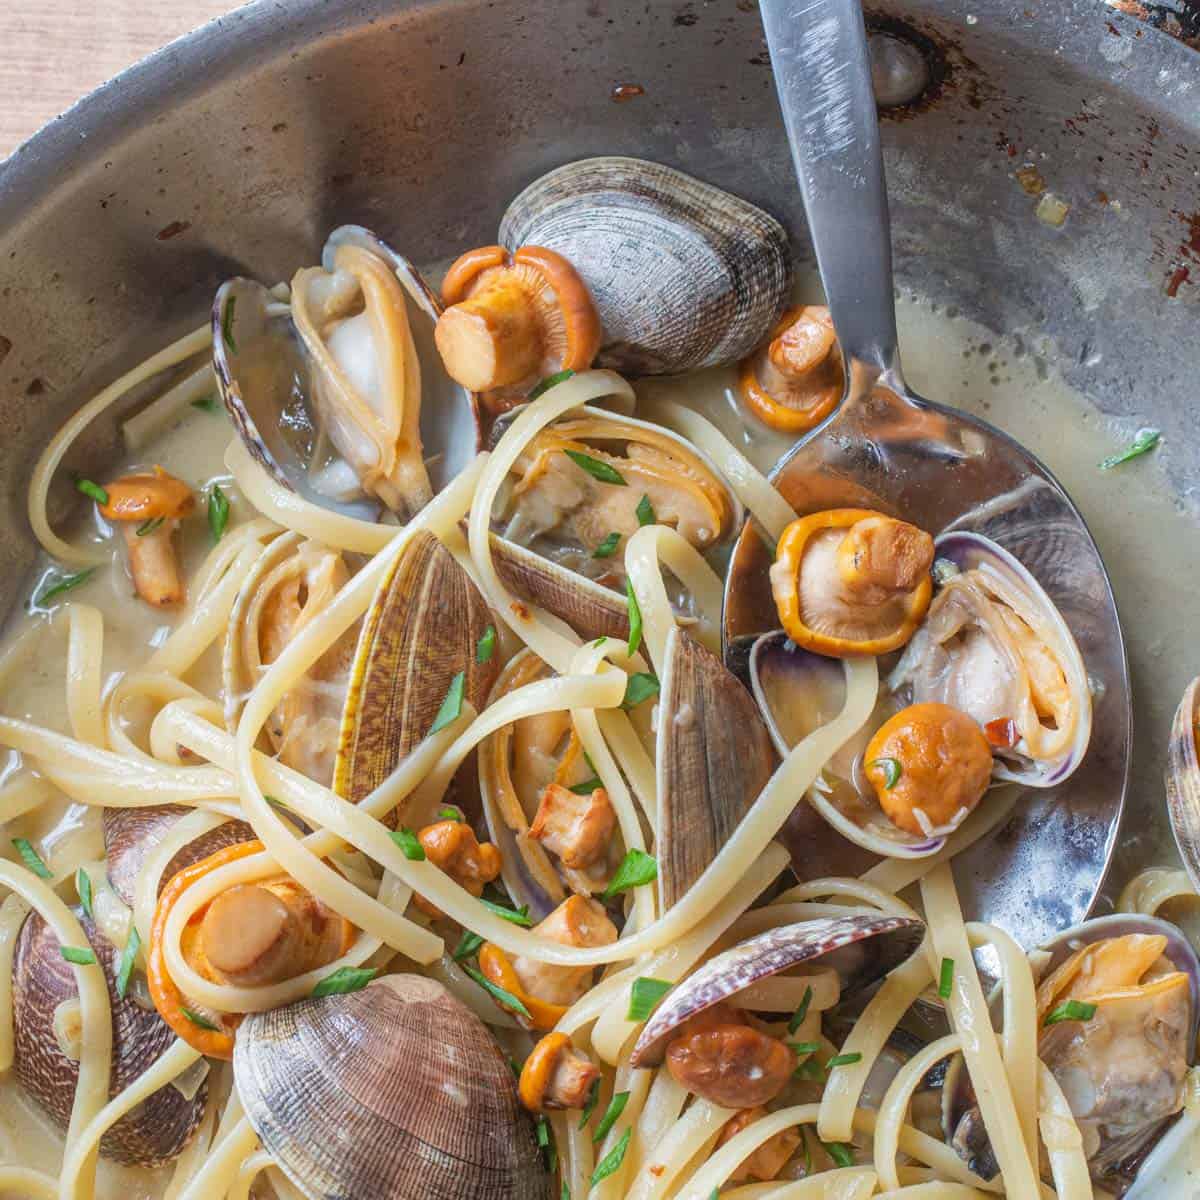 Linguine with white manilla clam sauce and chanterelle mushrooms